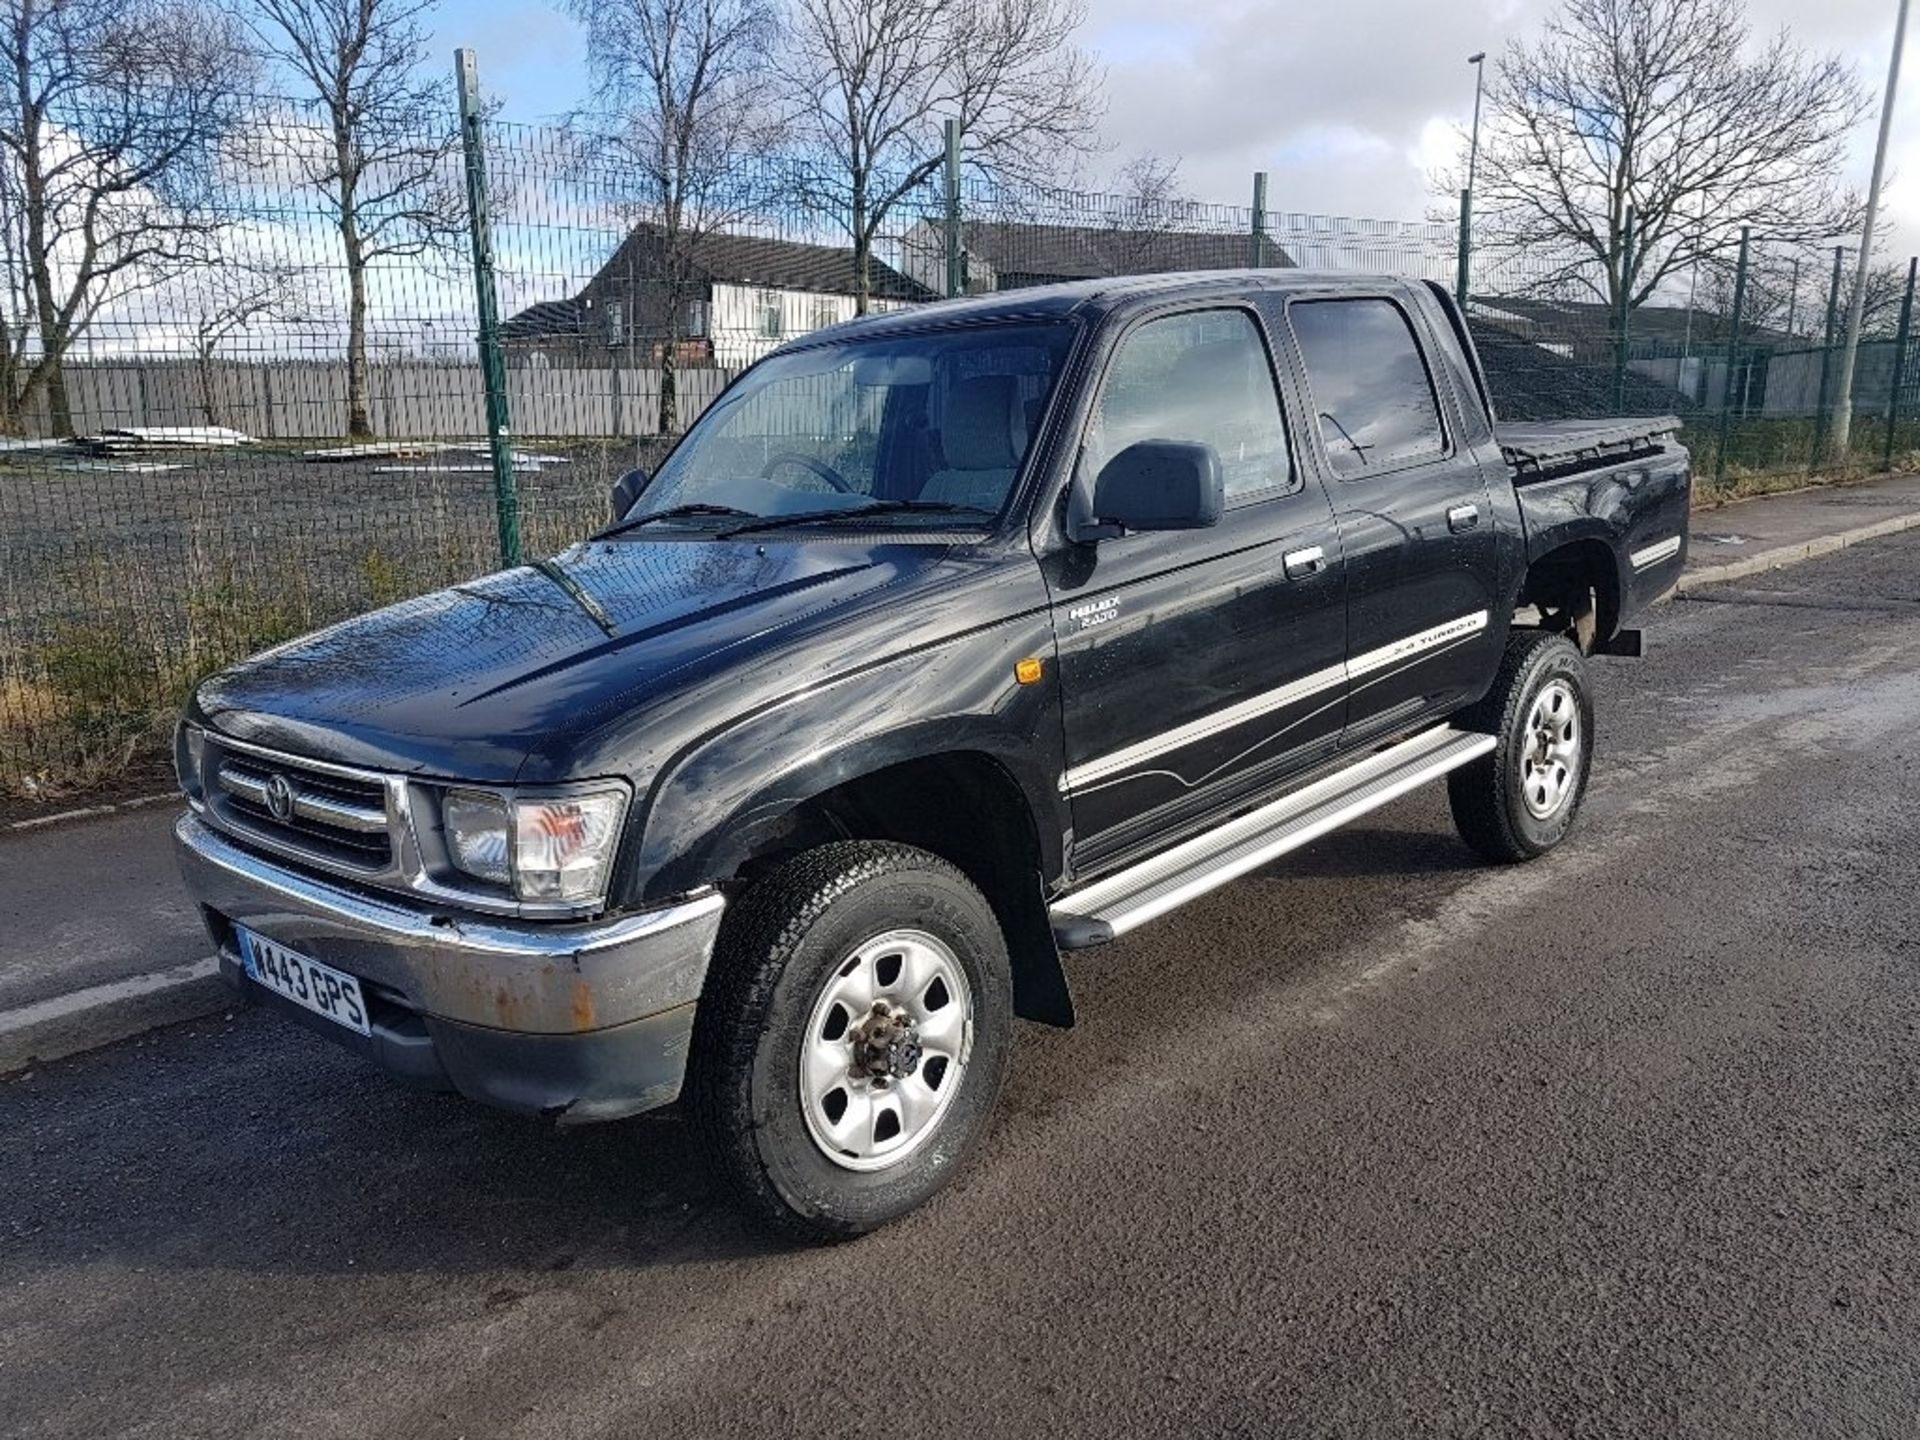 TOYOTA, HILUX 2.4 EX 4X4, W443 GPS, FIRST DATE OF REGISTRATION 02/08/2000, 2.4 LITRE TD, DIESEL, - Image 3 of 14